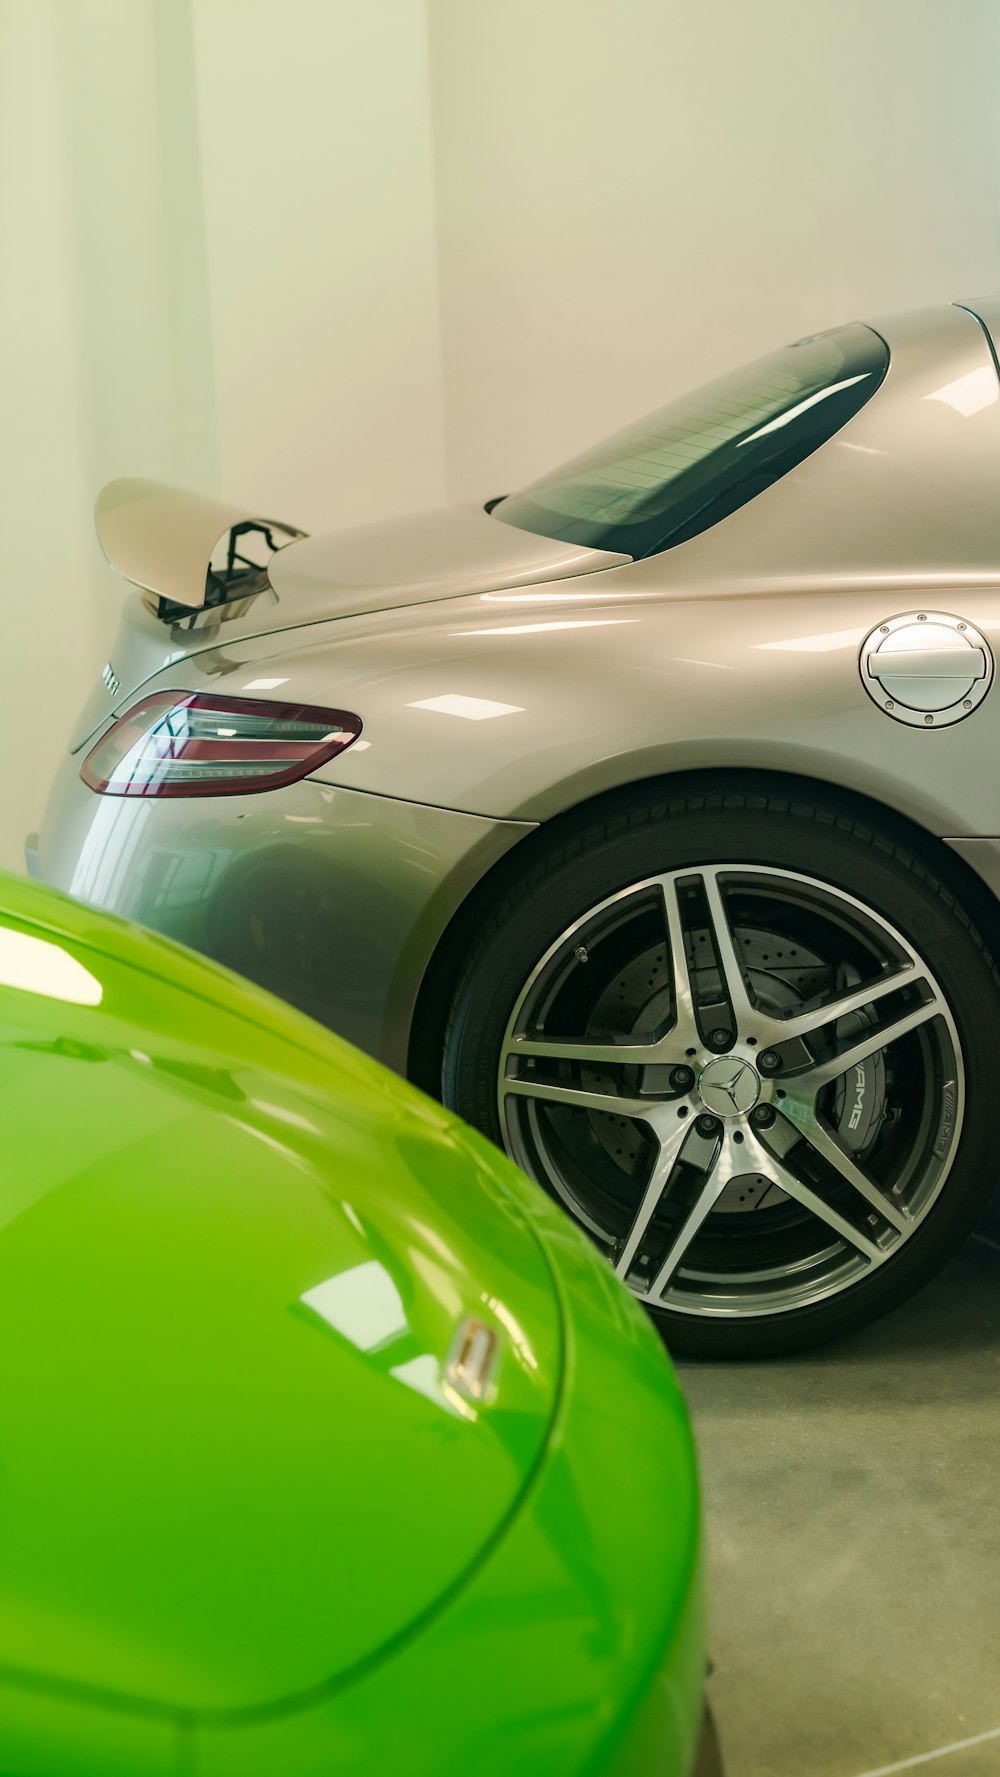 a silver sports car parked next to a green sports car